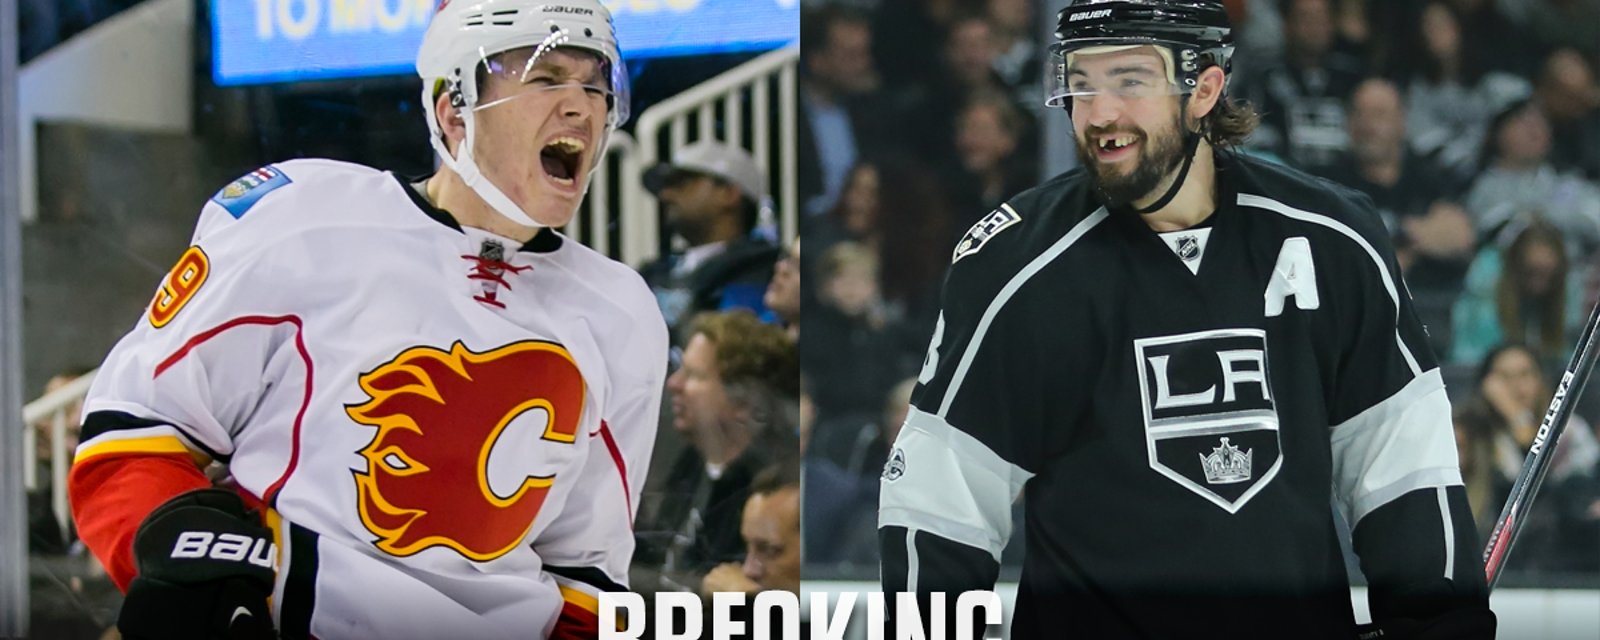 BREAKING: Matthew Tkachuk fires back at Doughty's comments saying he's a DIRTY player.